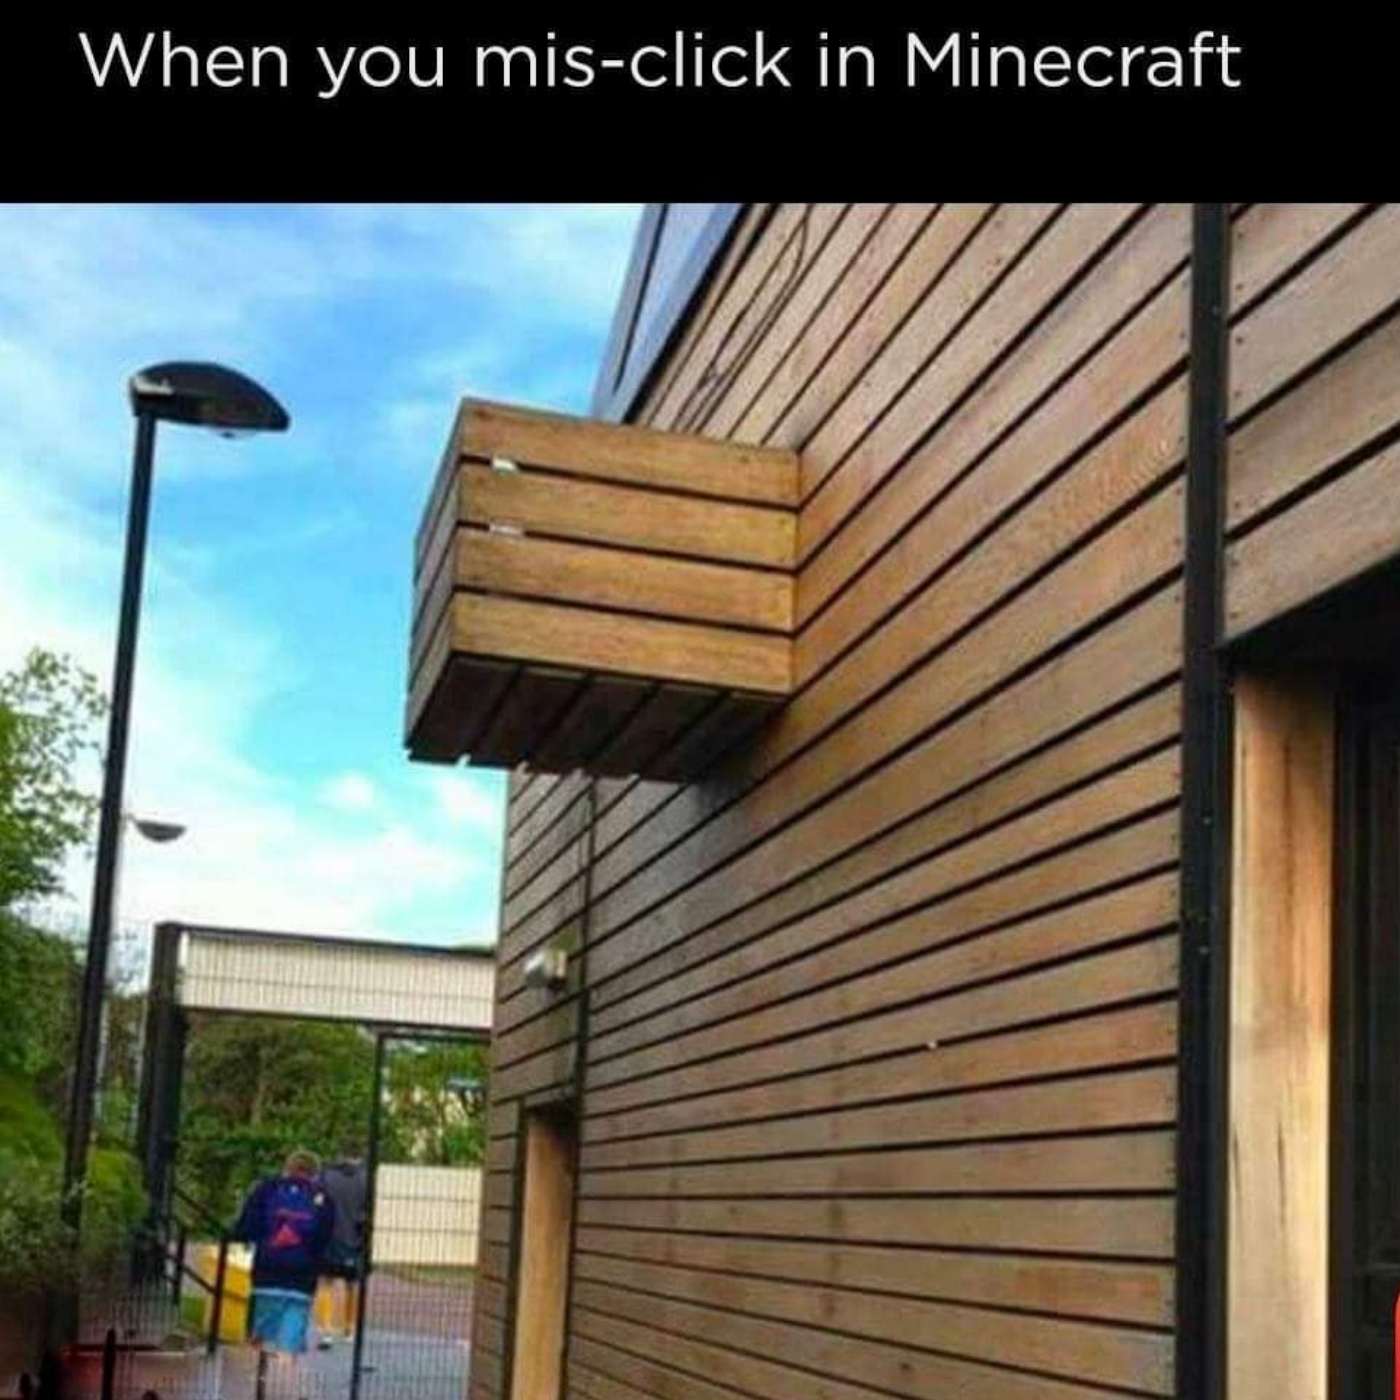 Miss clicking in Minecraft be like